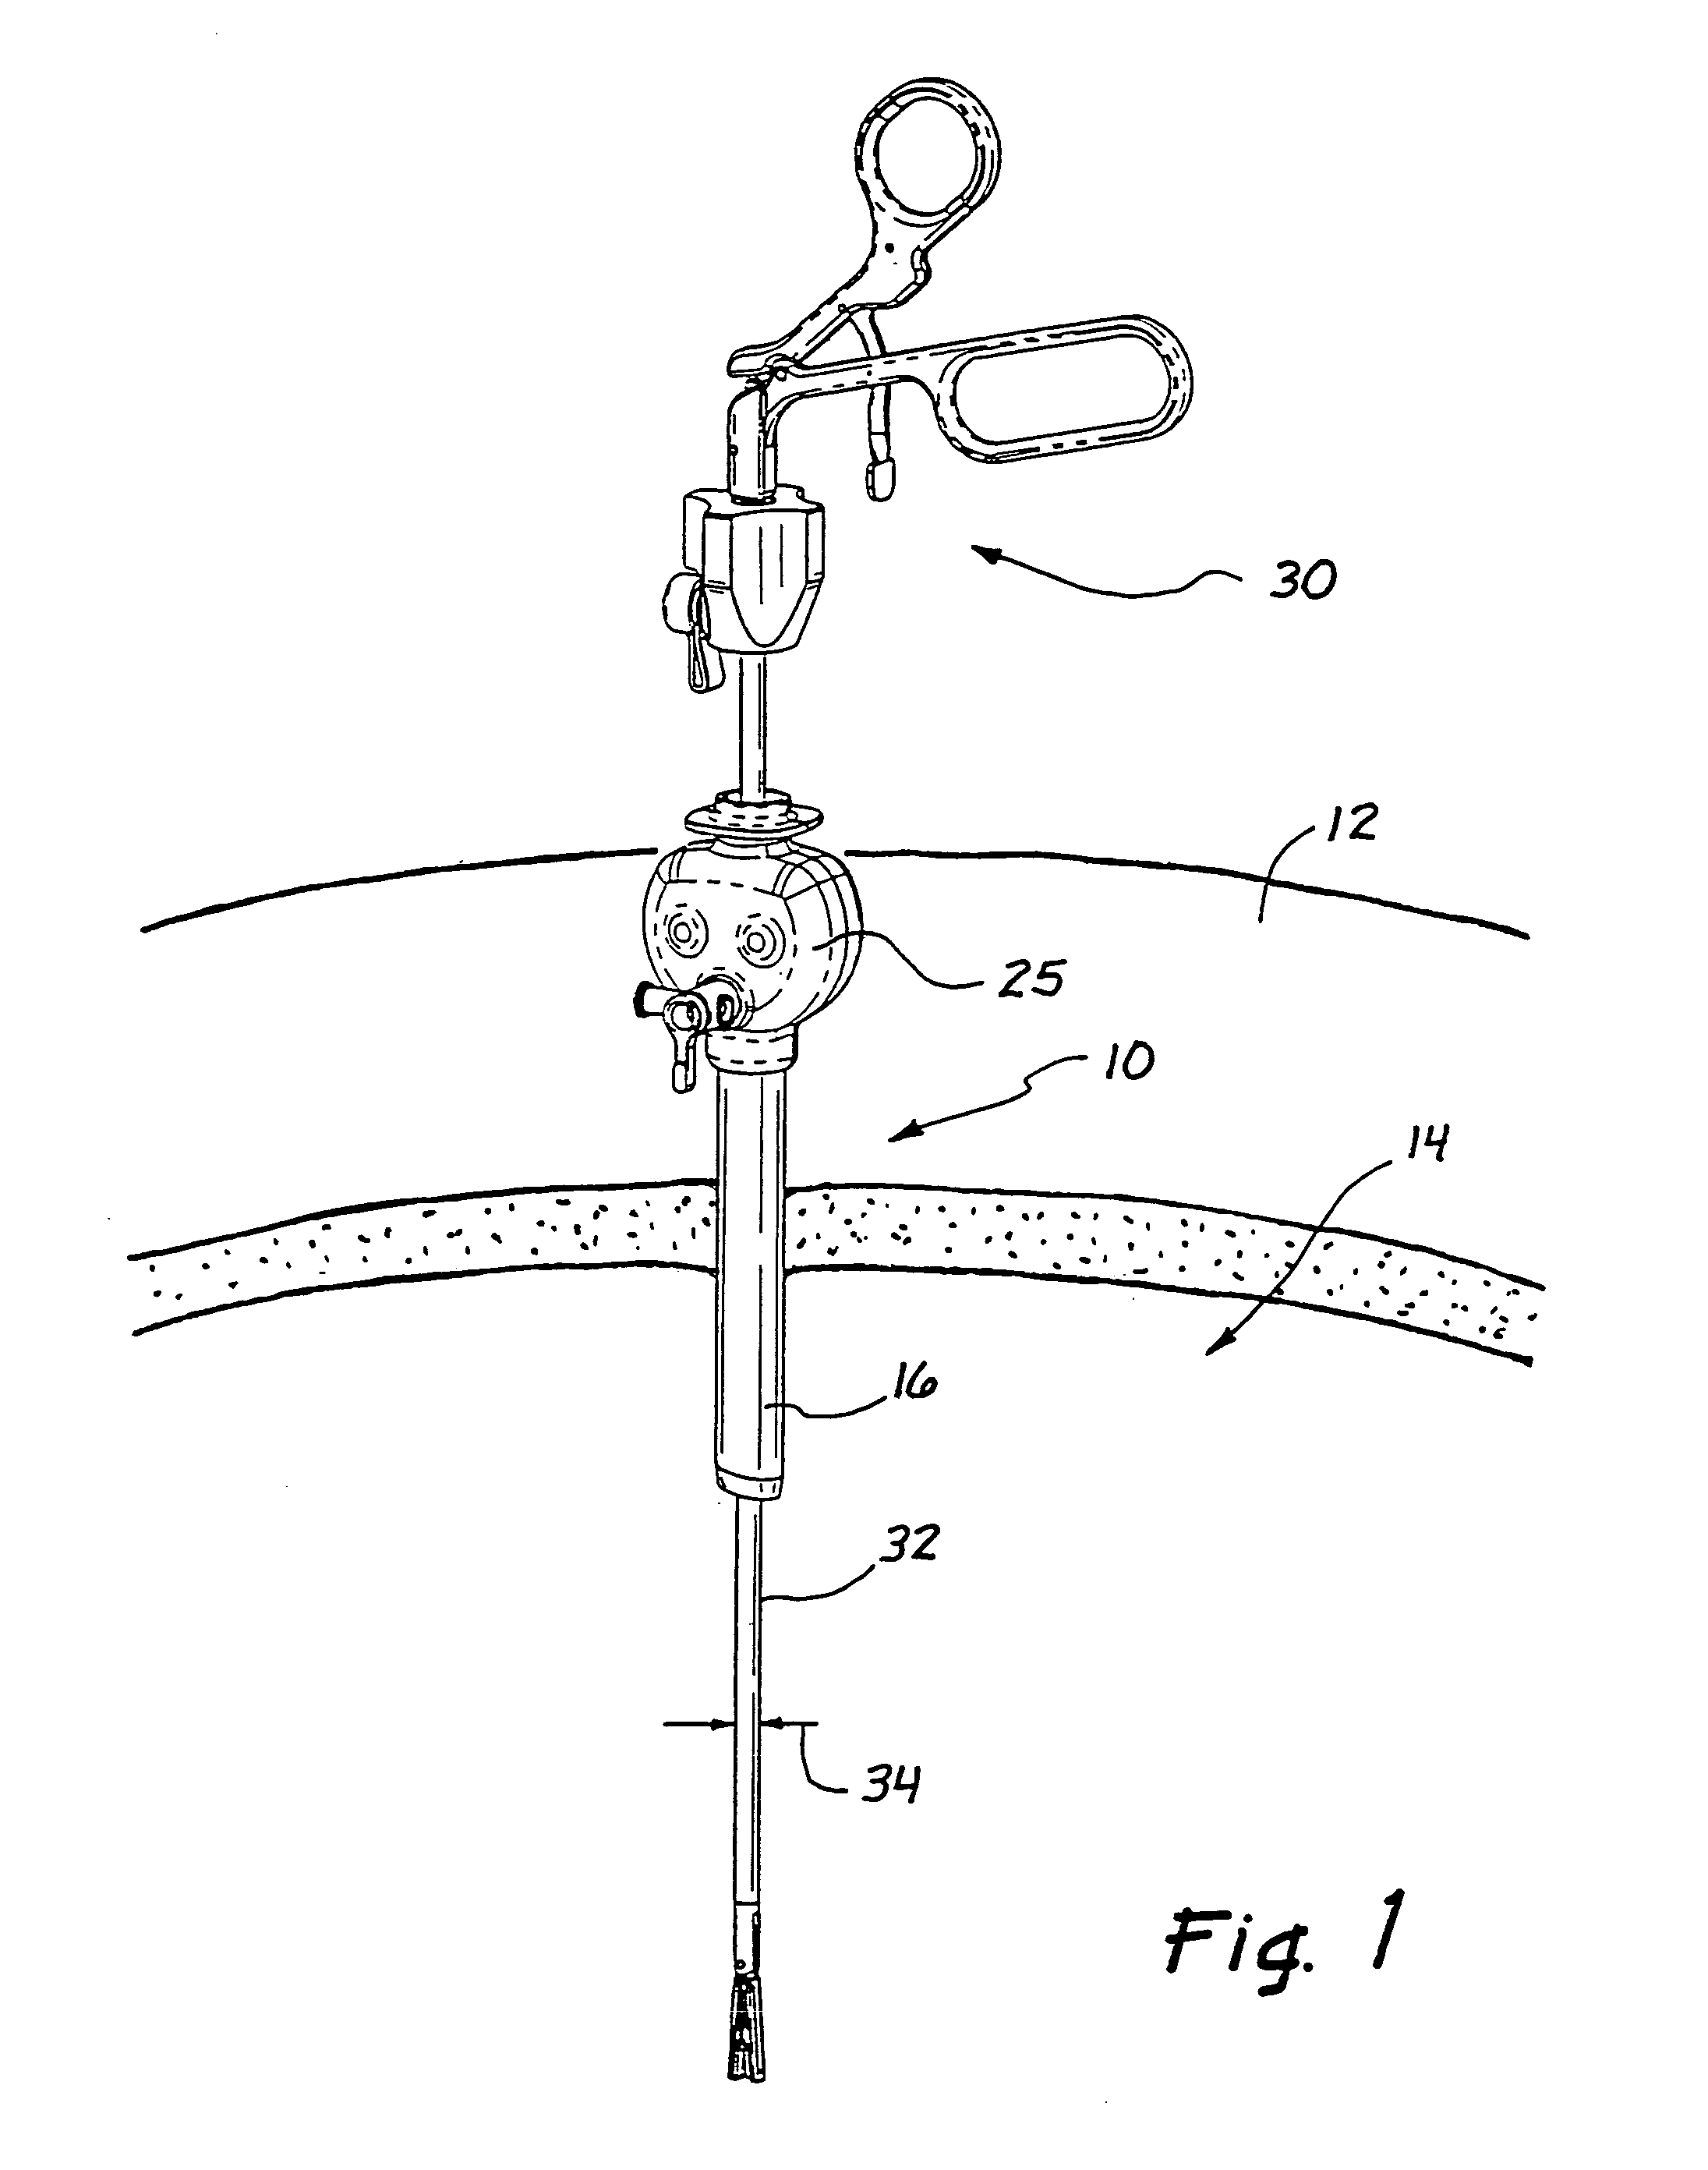 Access device maintenance apparatus and method